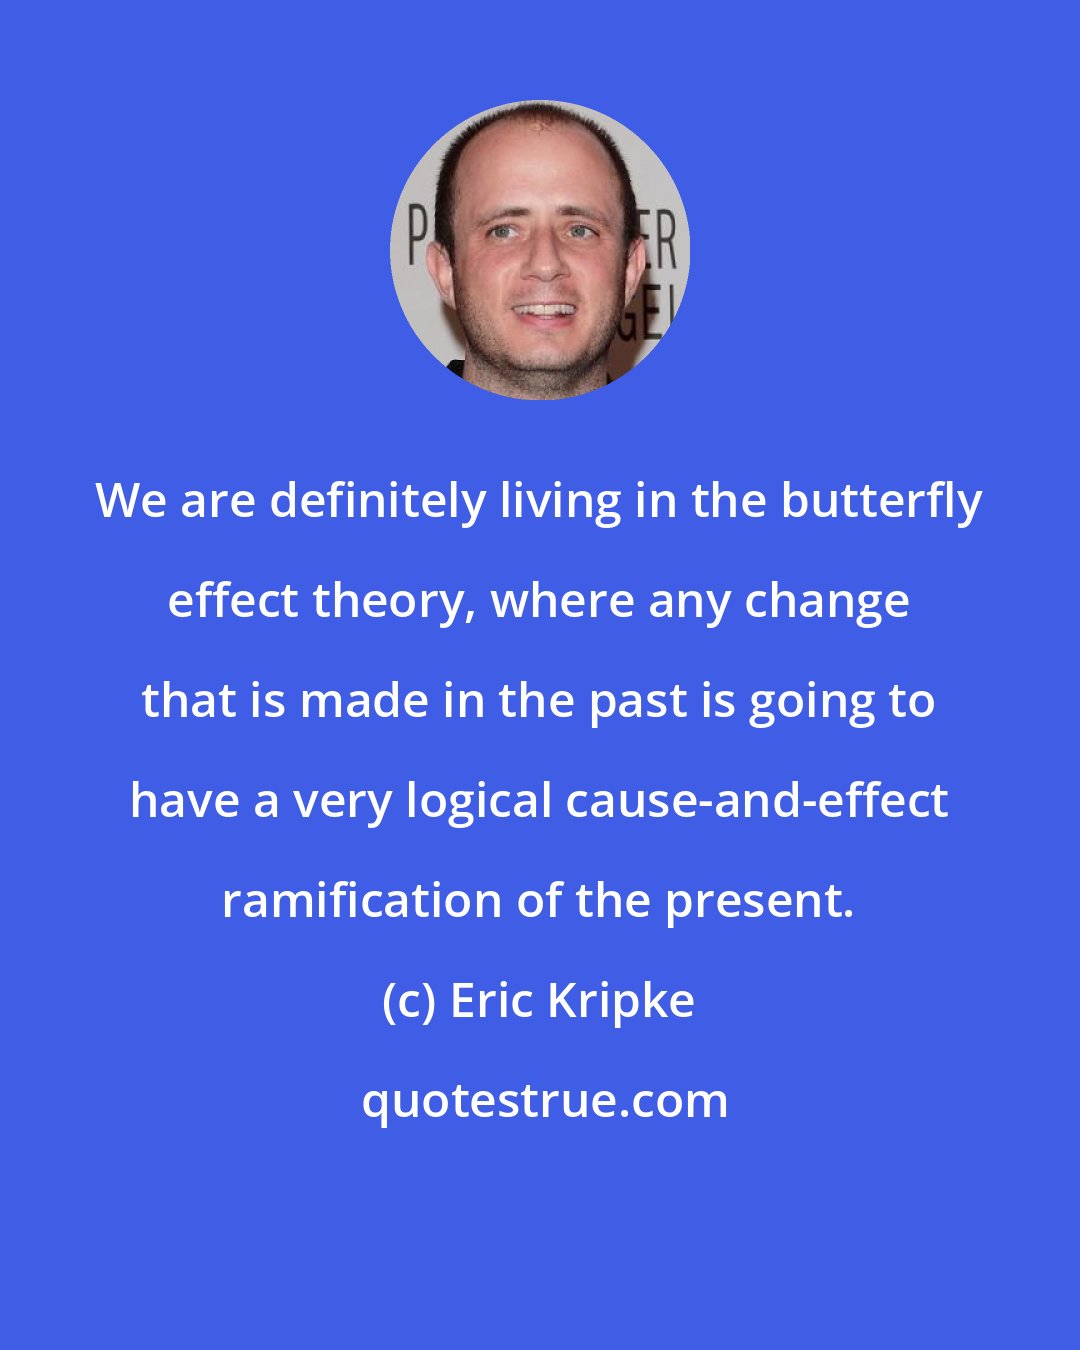 Eric Kripke: We are definitely living in the butterfly effect theory, where any change that is made in the past is going to have a very logical cause-and-effect ramification of the present.